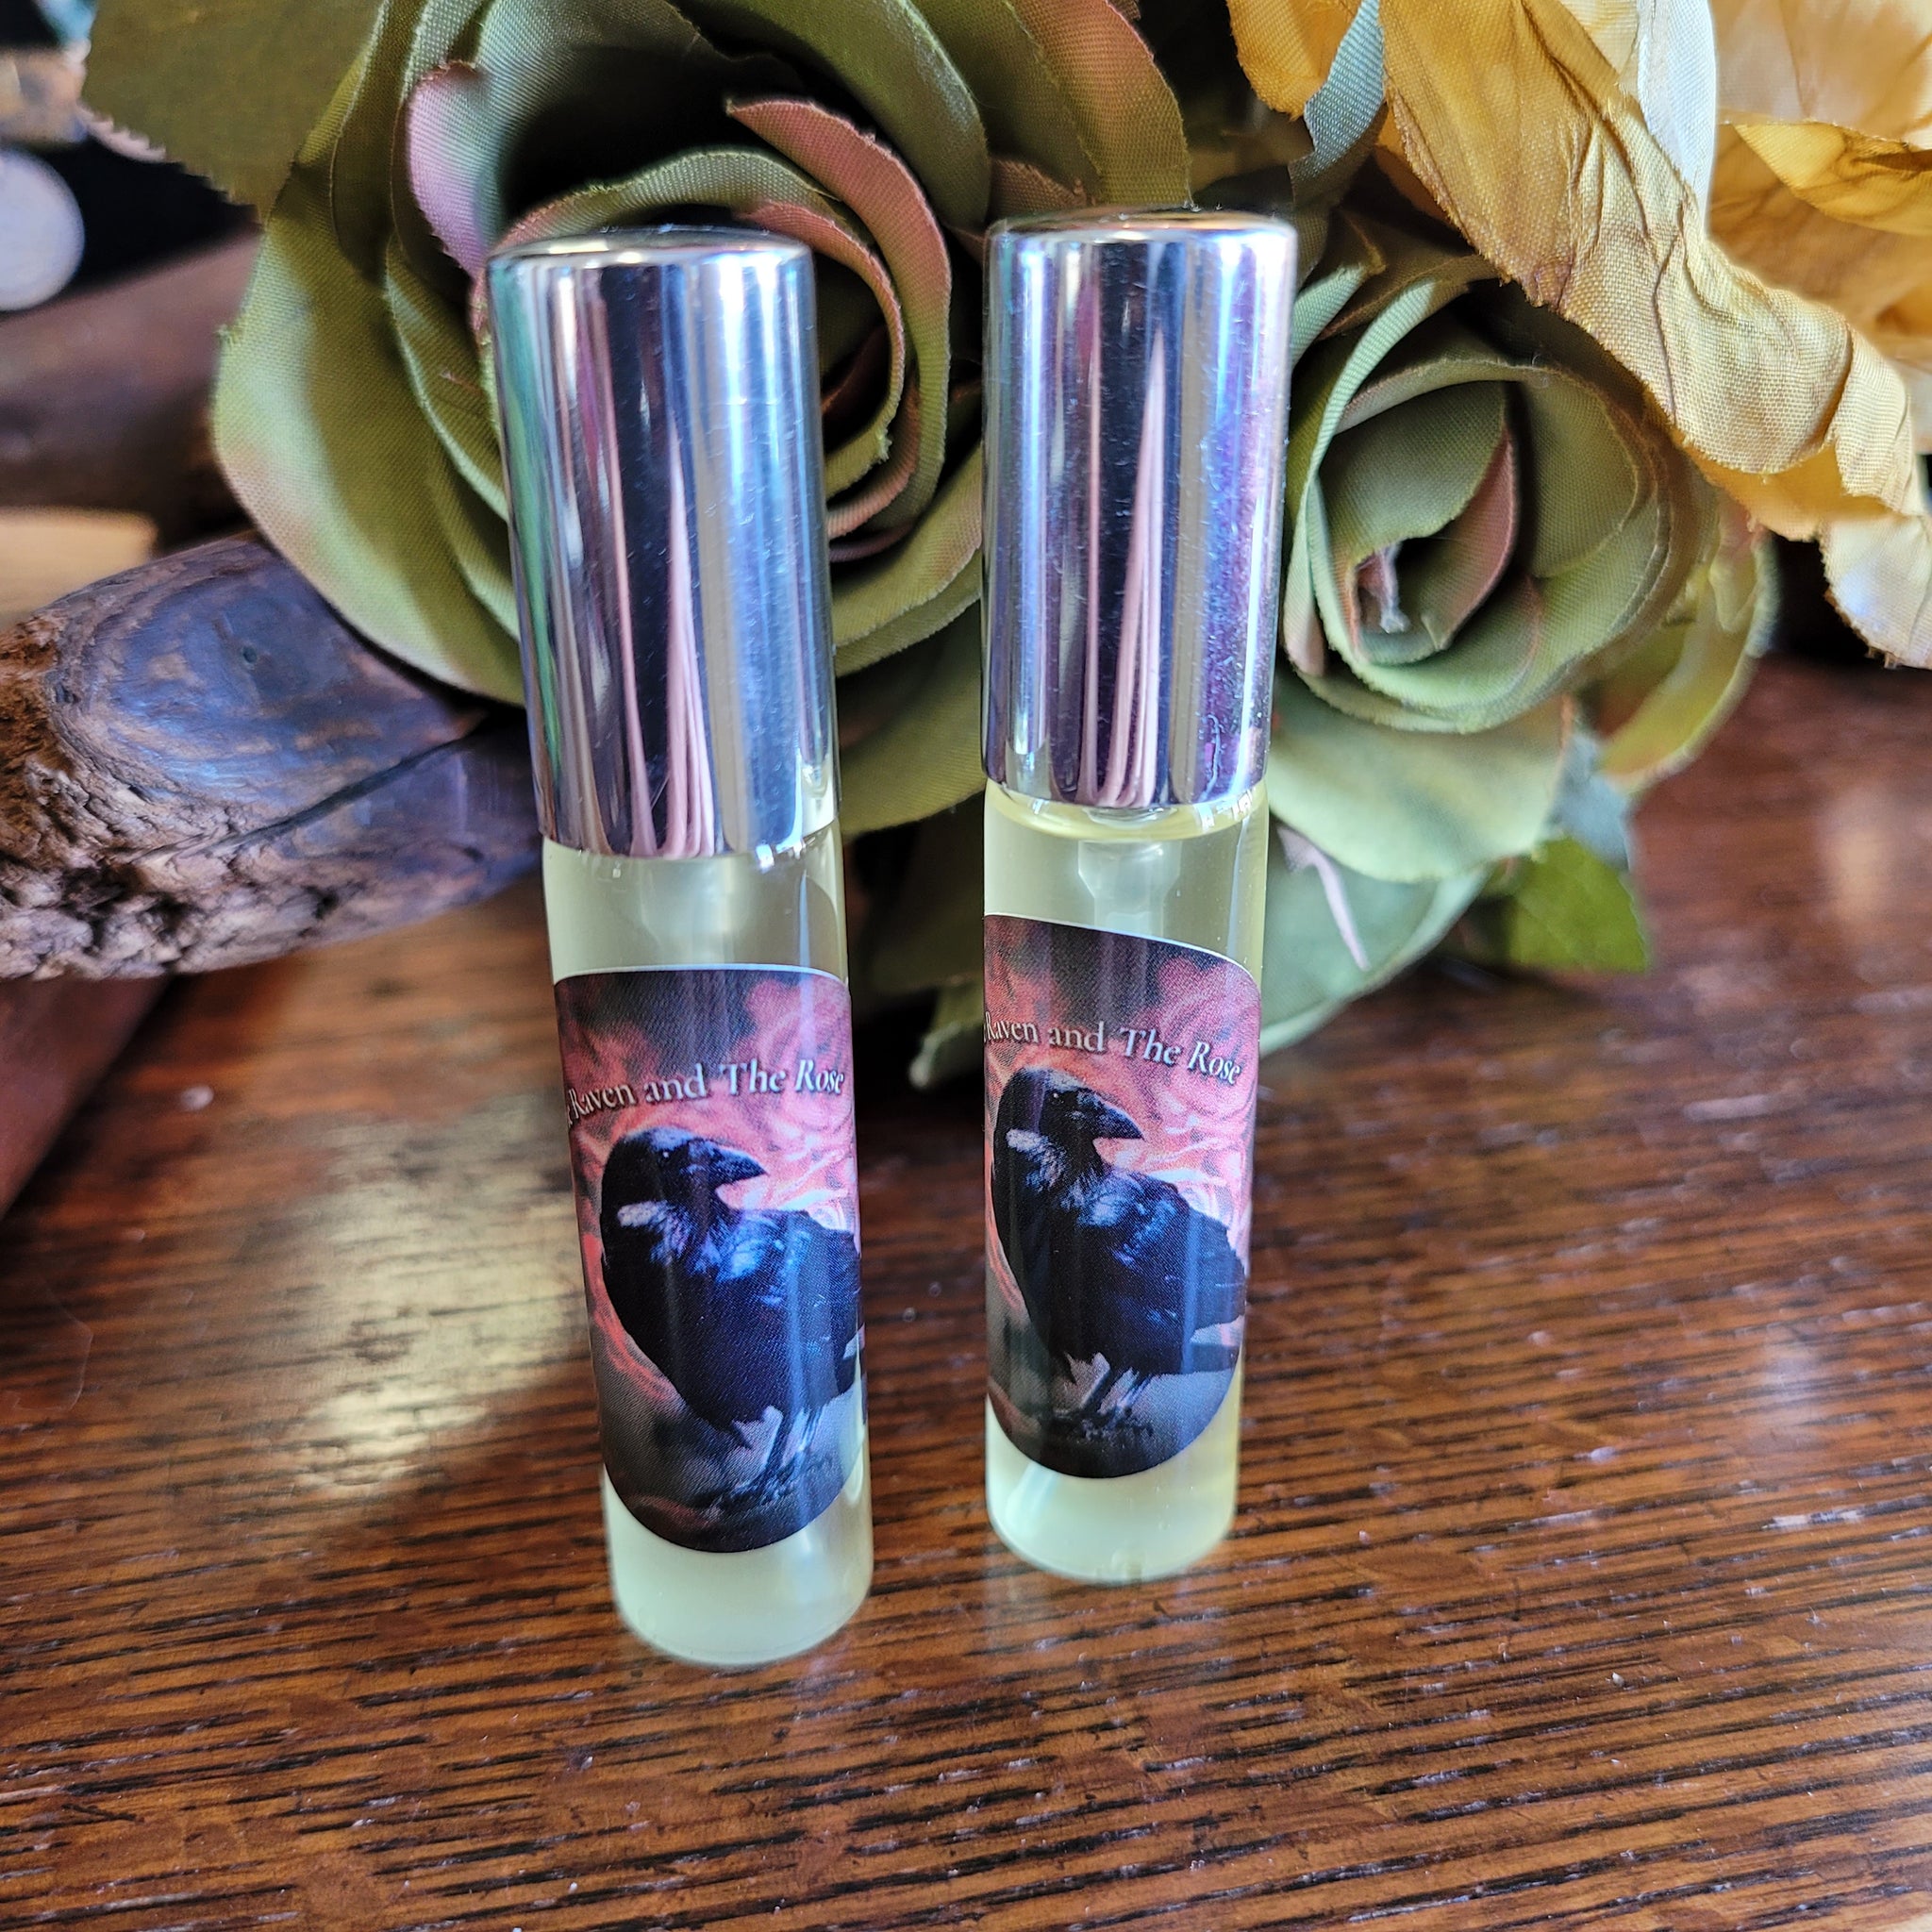 The Raven and the Rose Perfume